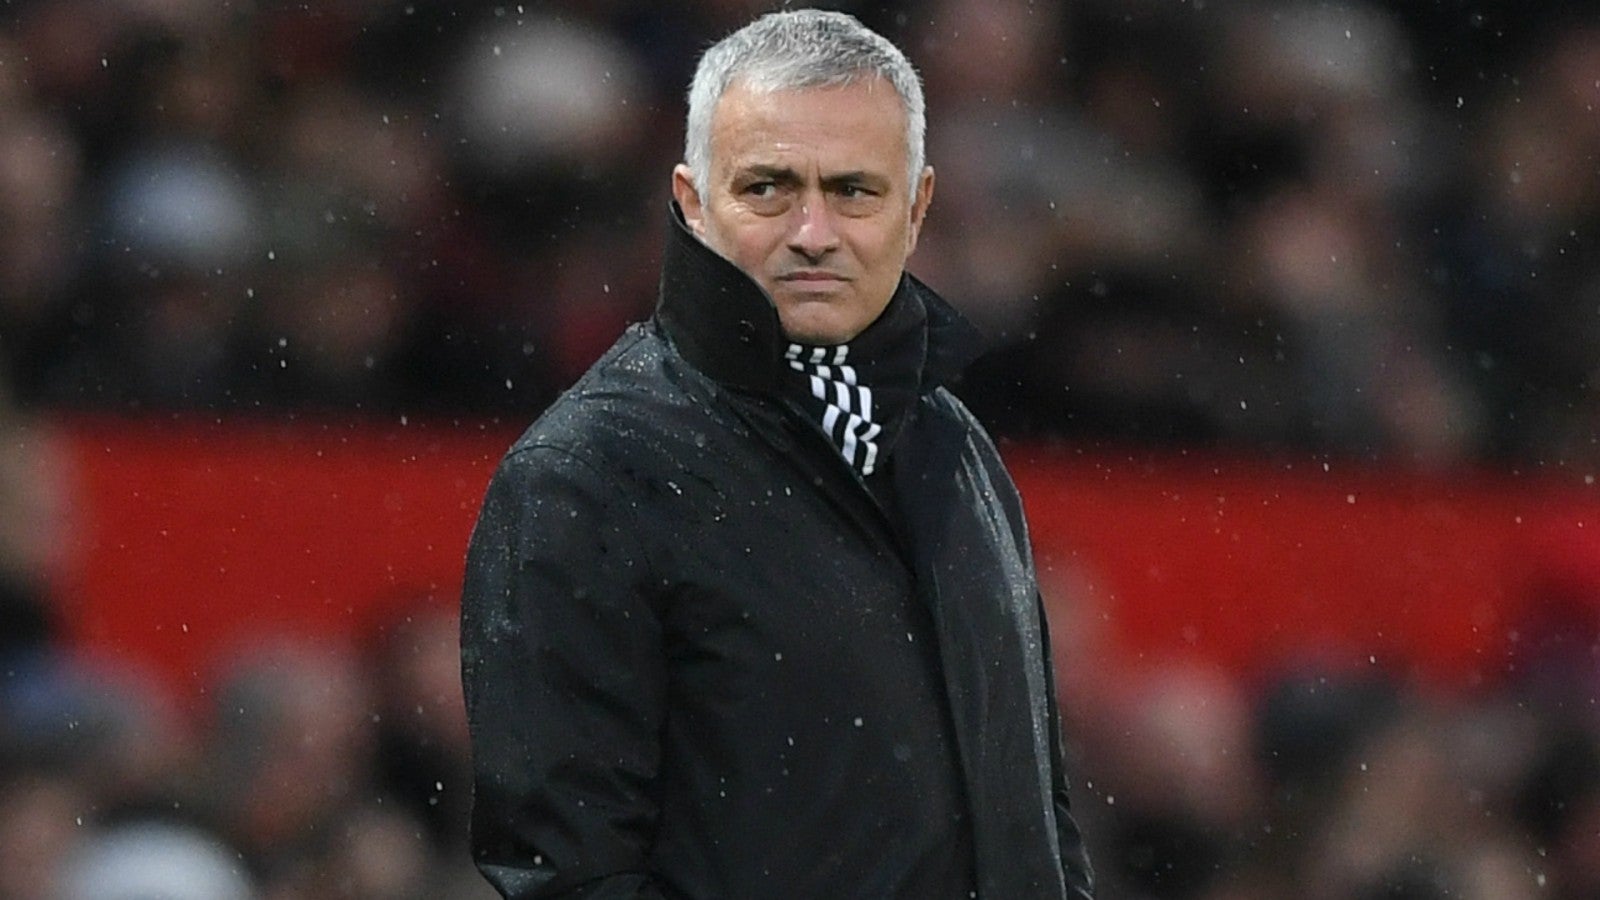 BREAKING: Manchester United Has Just Sacked José Mourinho - WORLD OF BUZZ